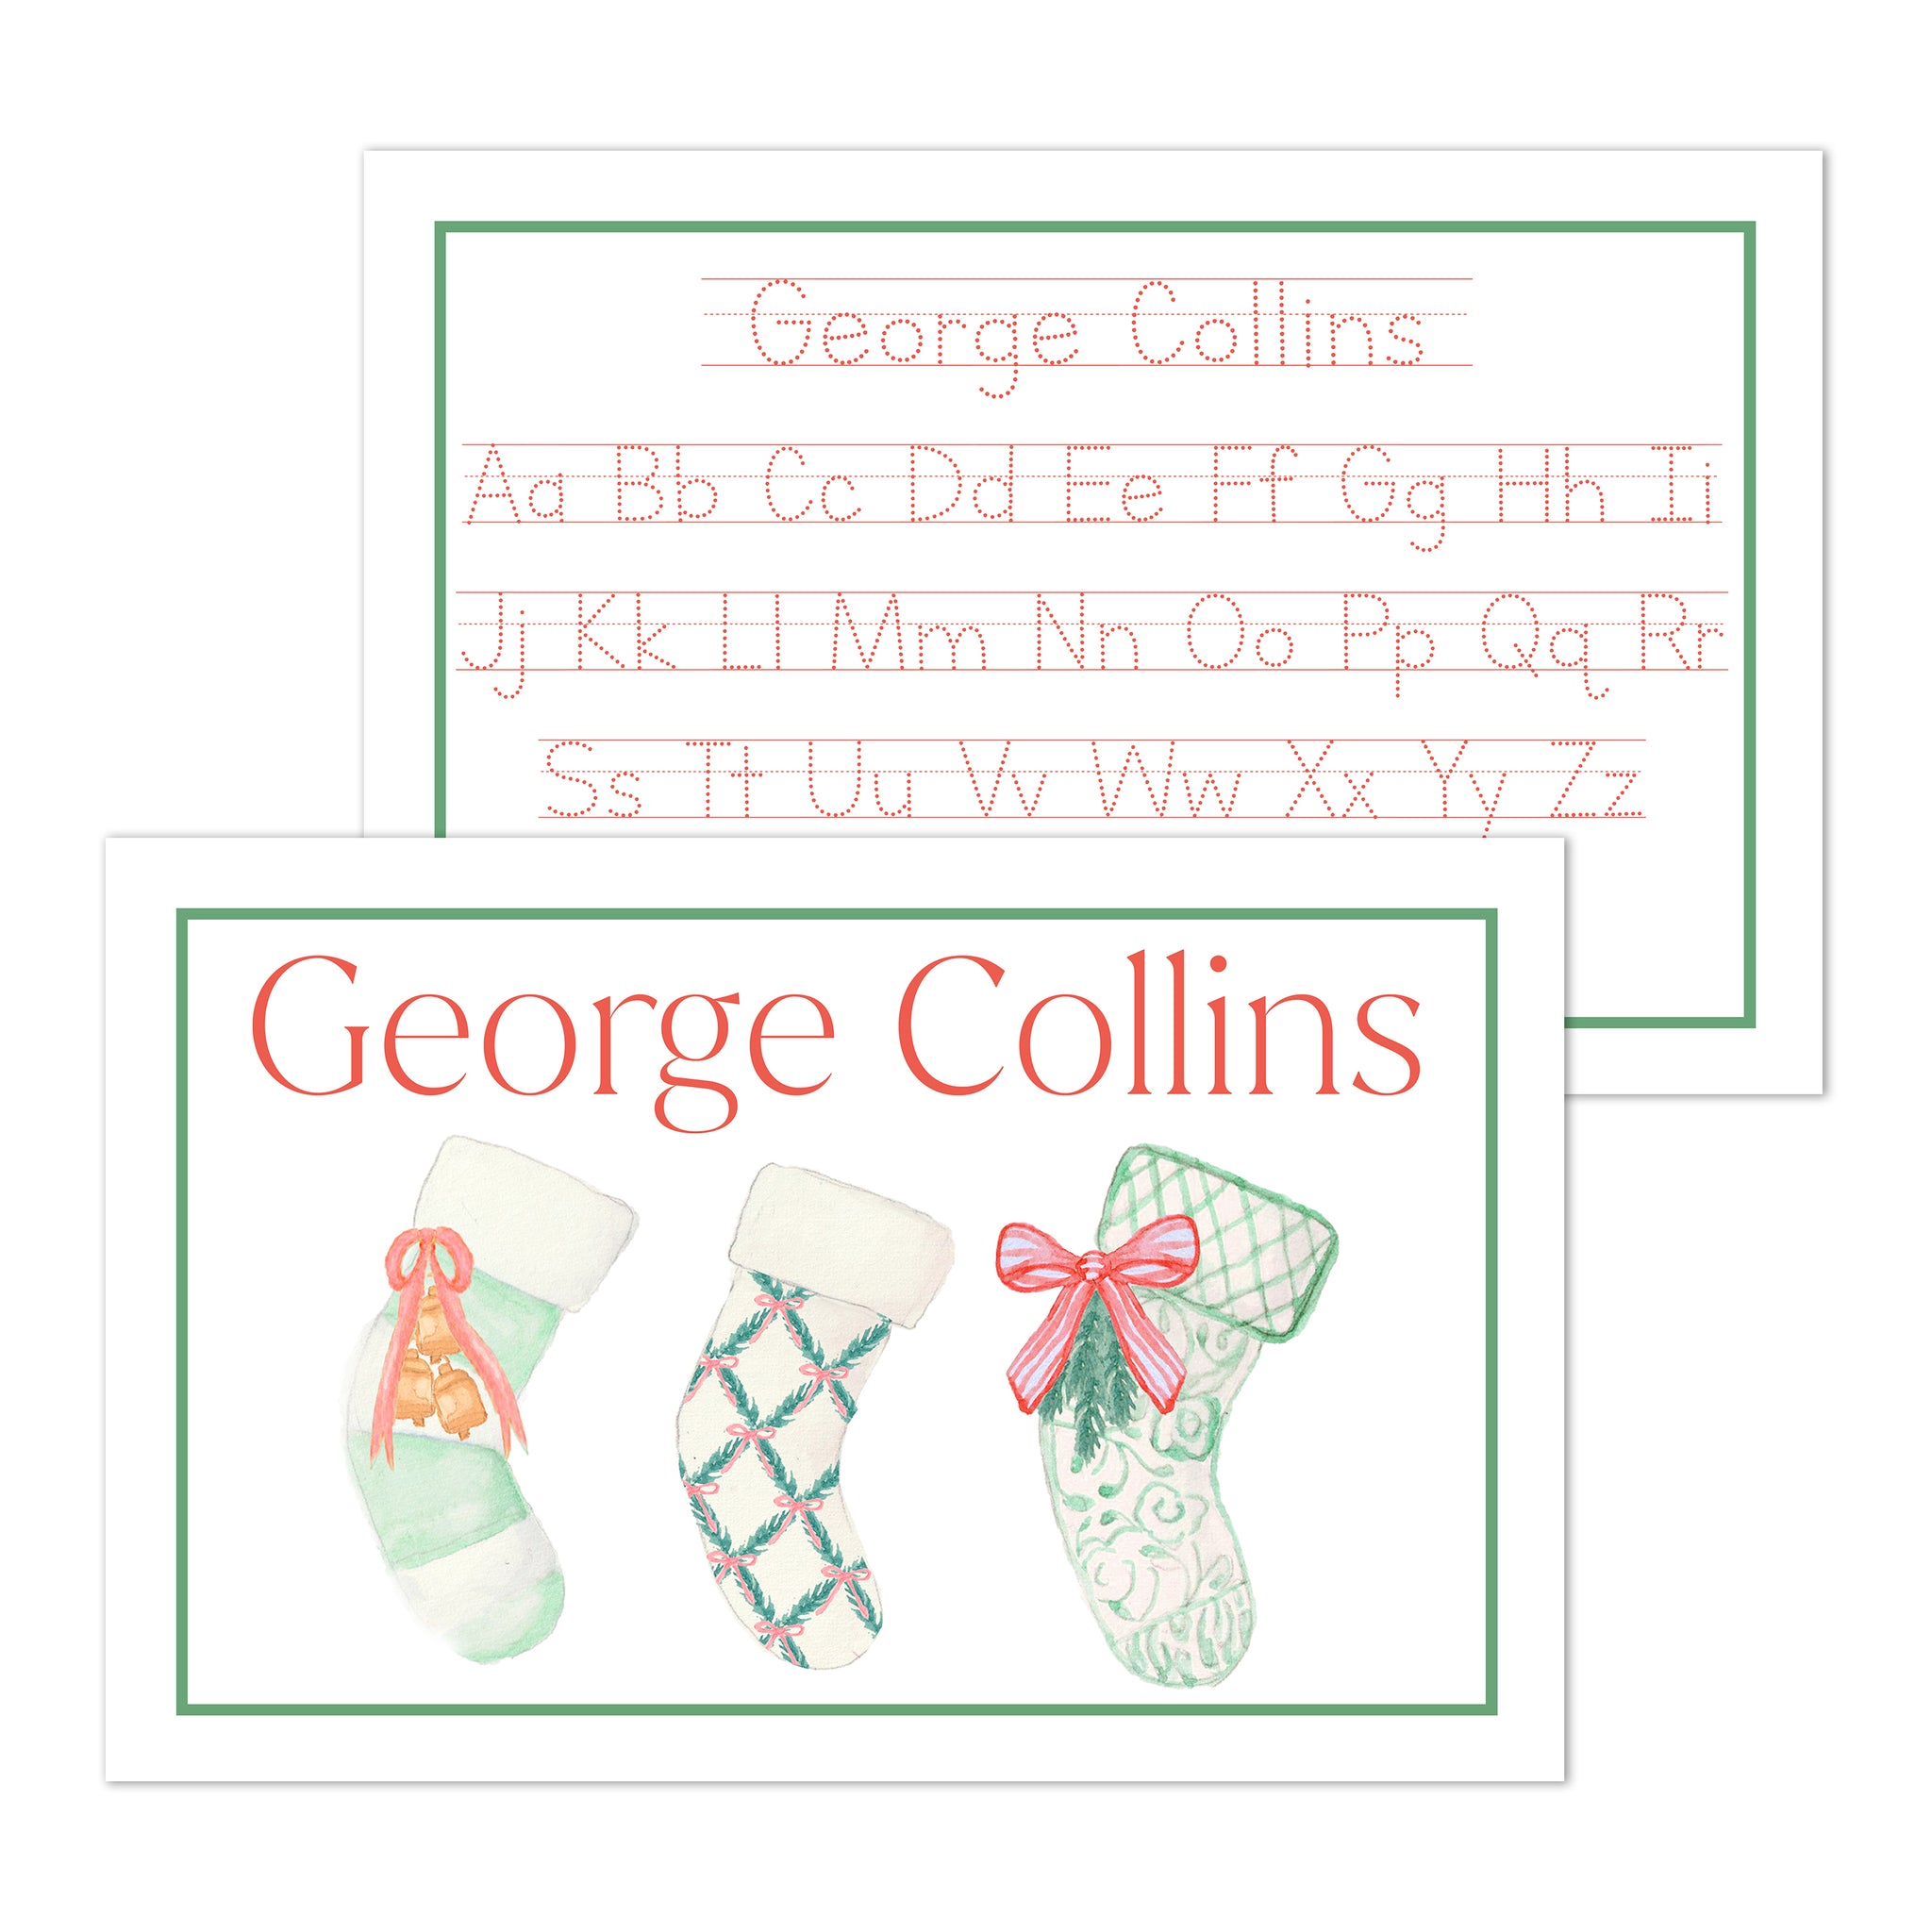 Stockings Laminated Placemat, Red and Green with Block Letters